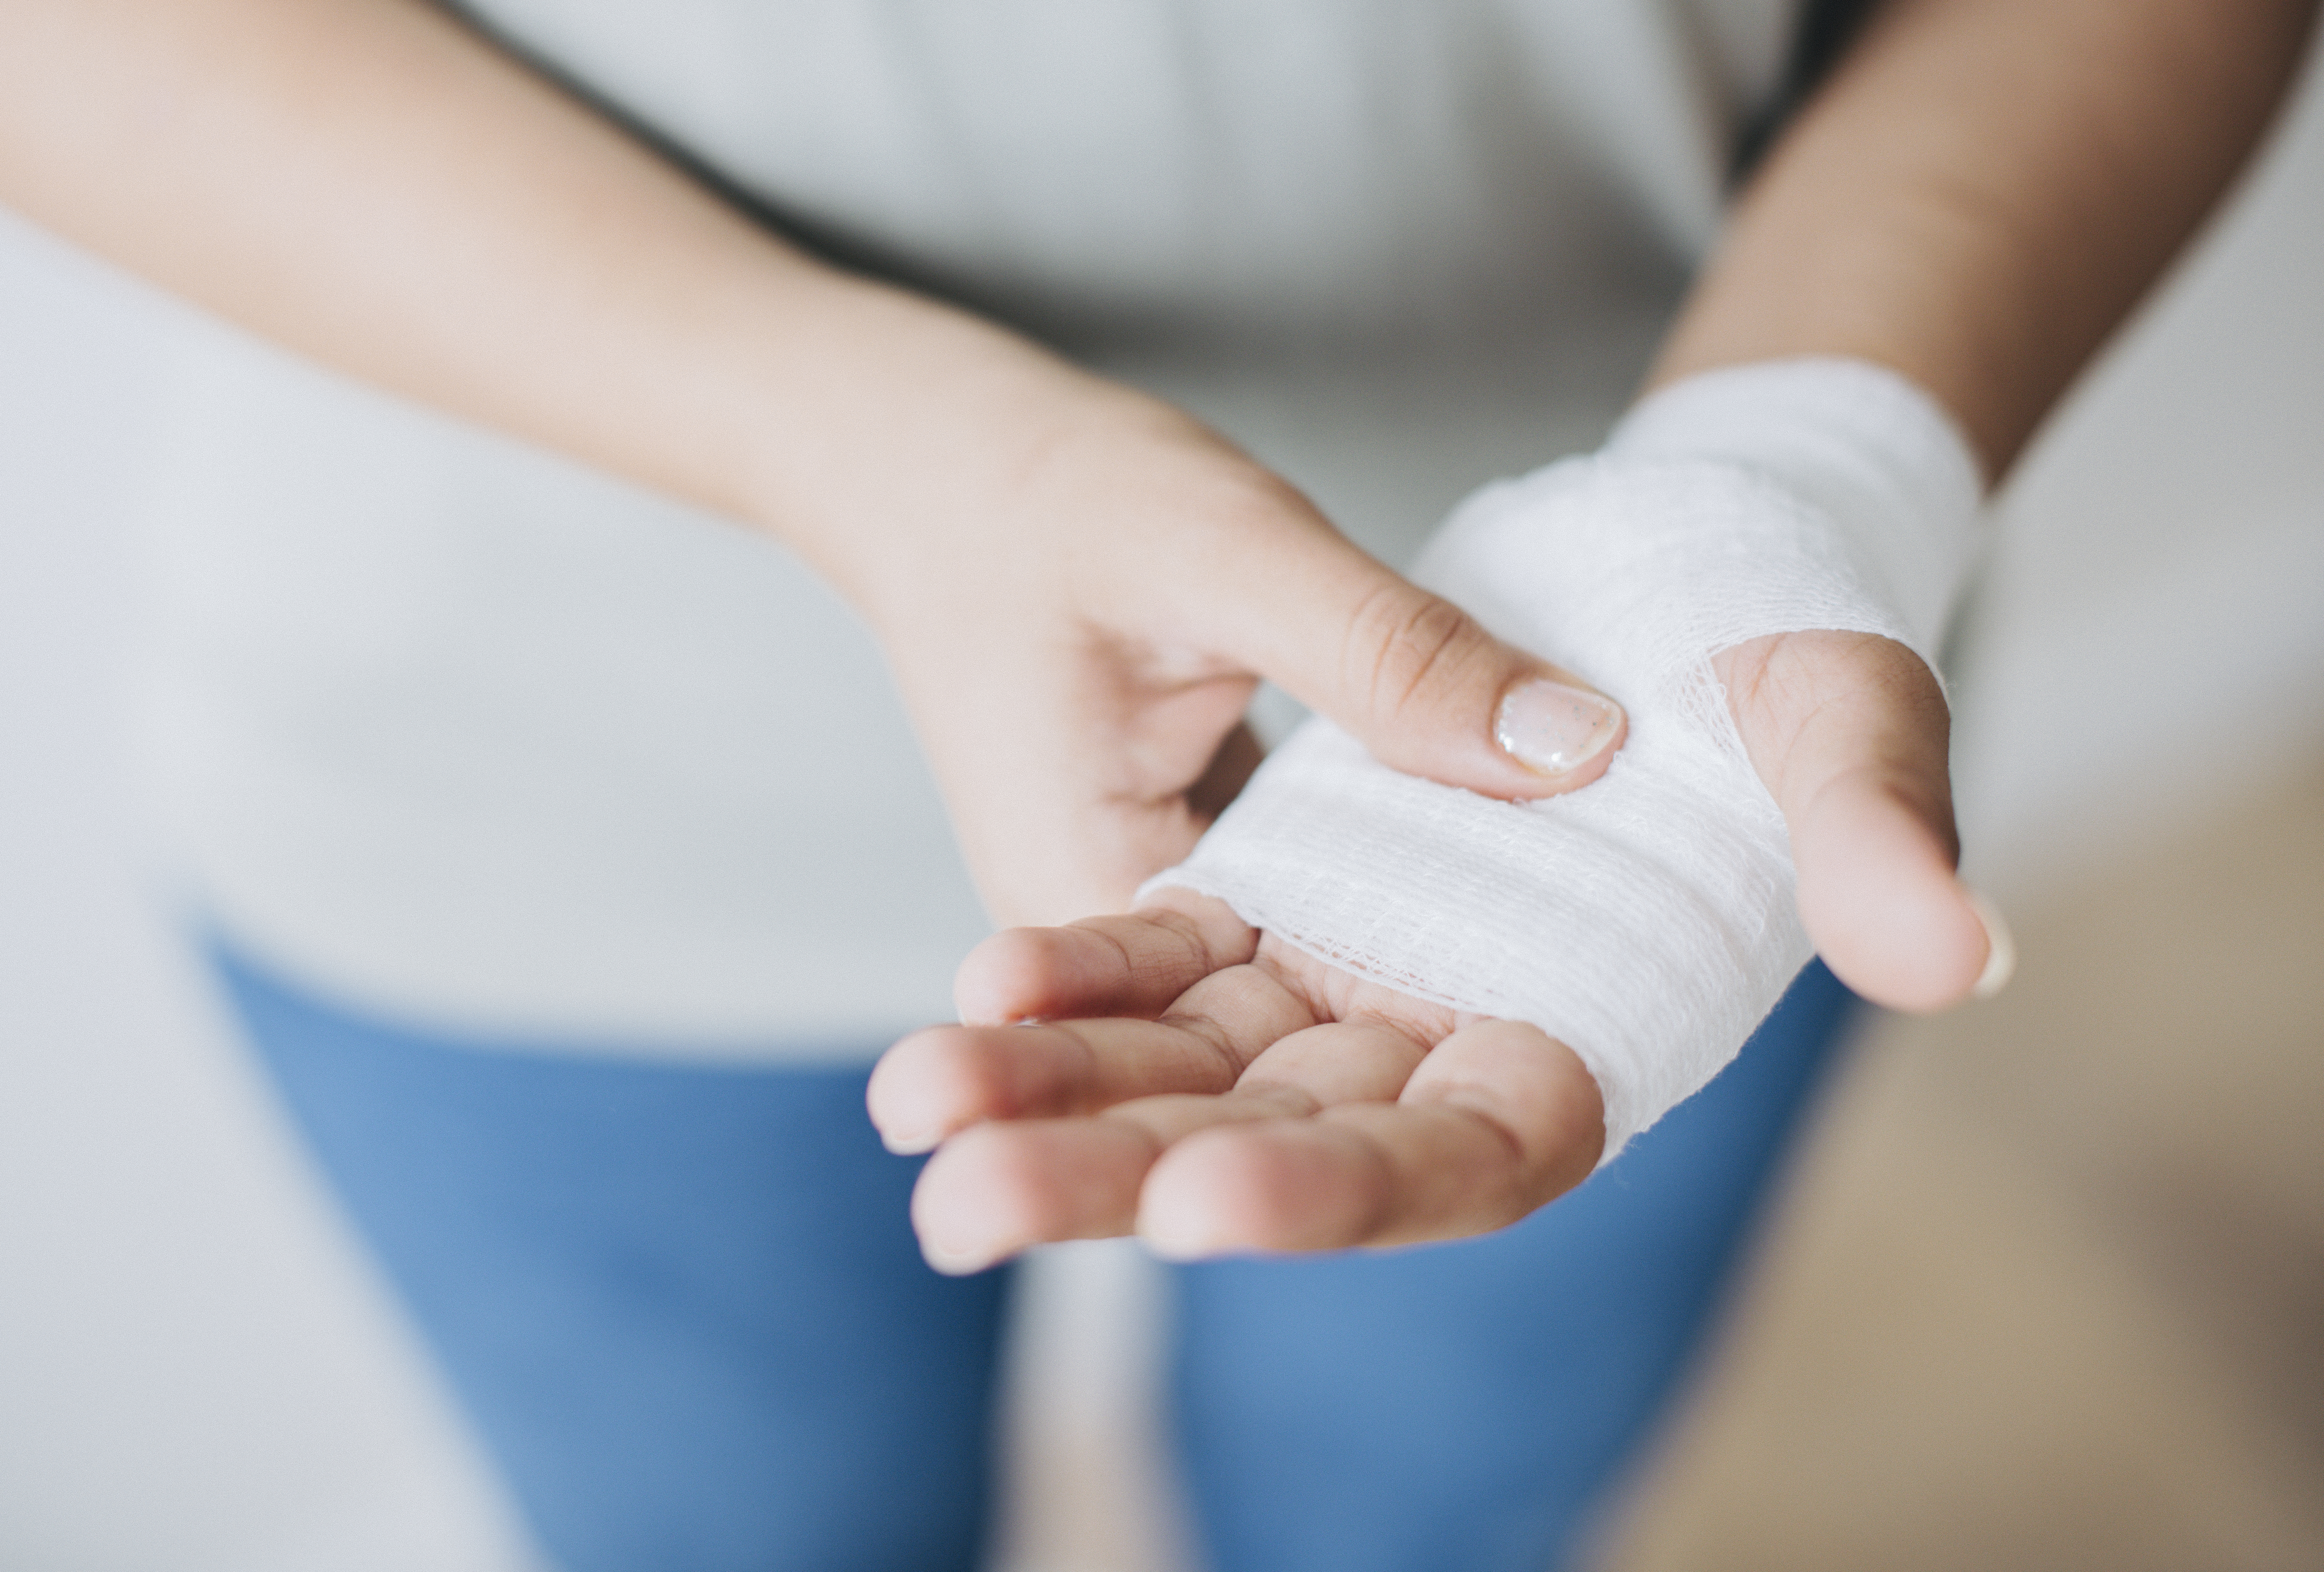 Injured Hand photo leading to link for Comprehensive Personal Injury Service